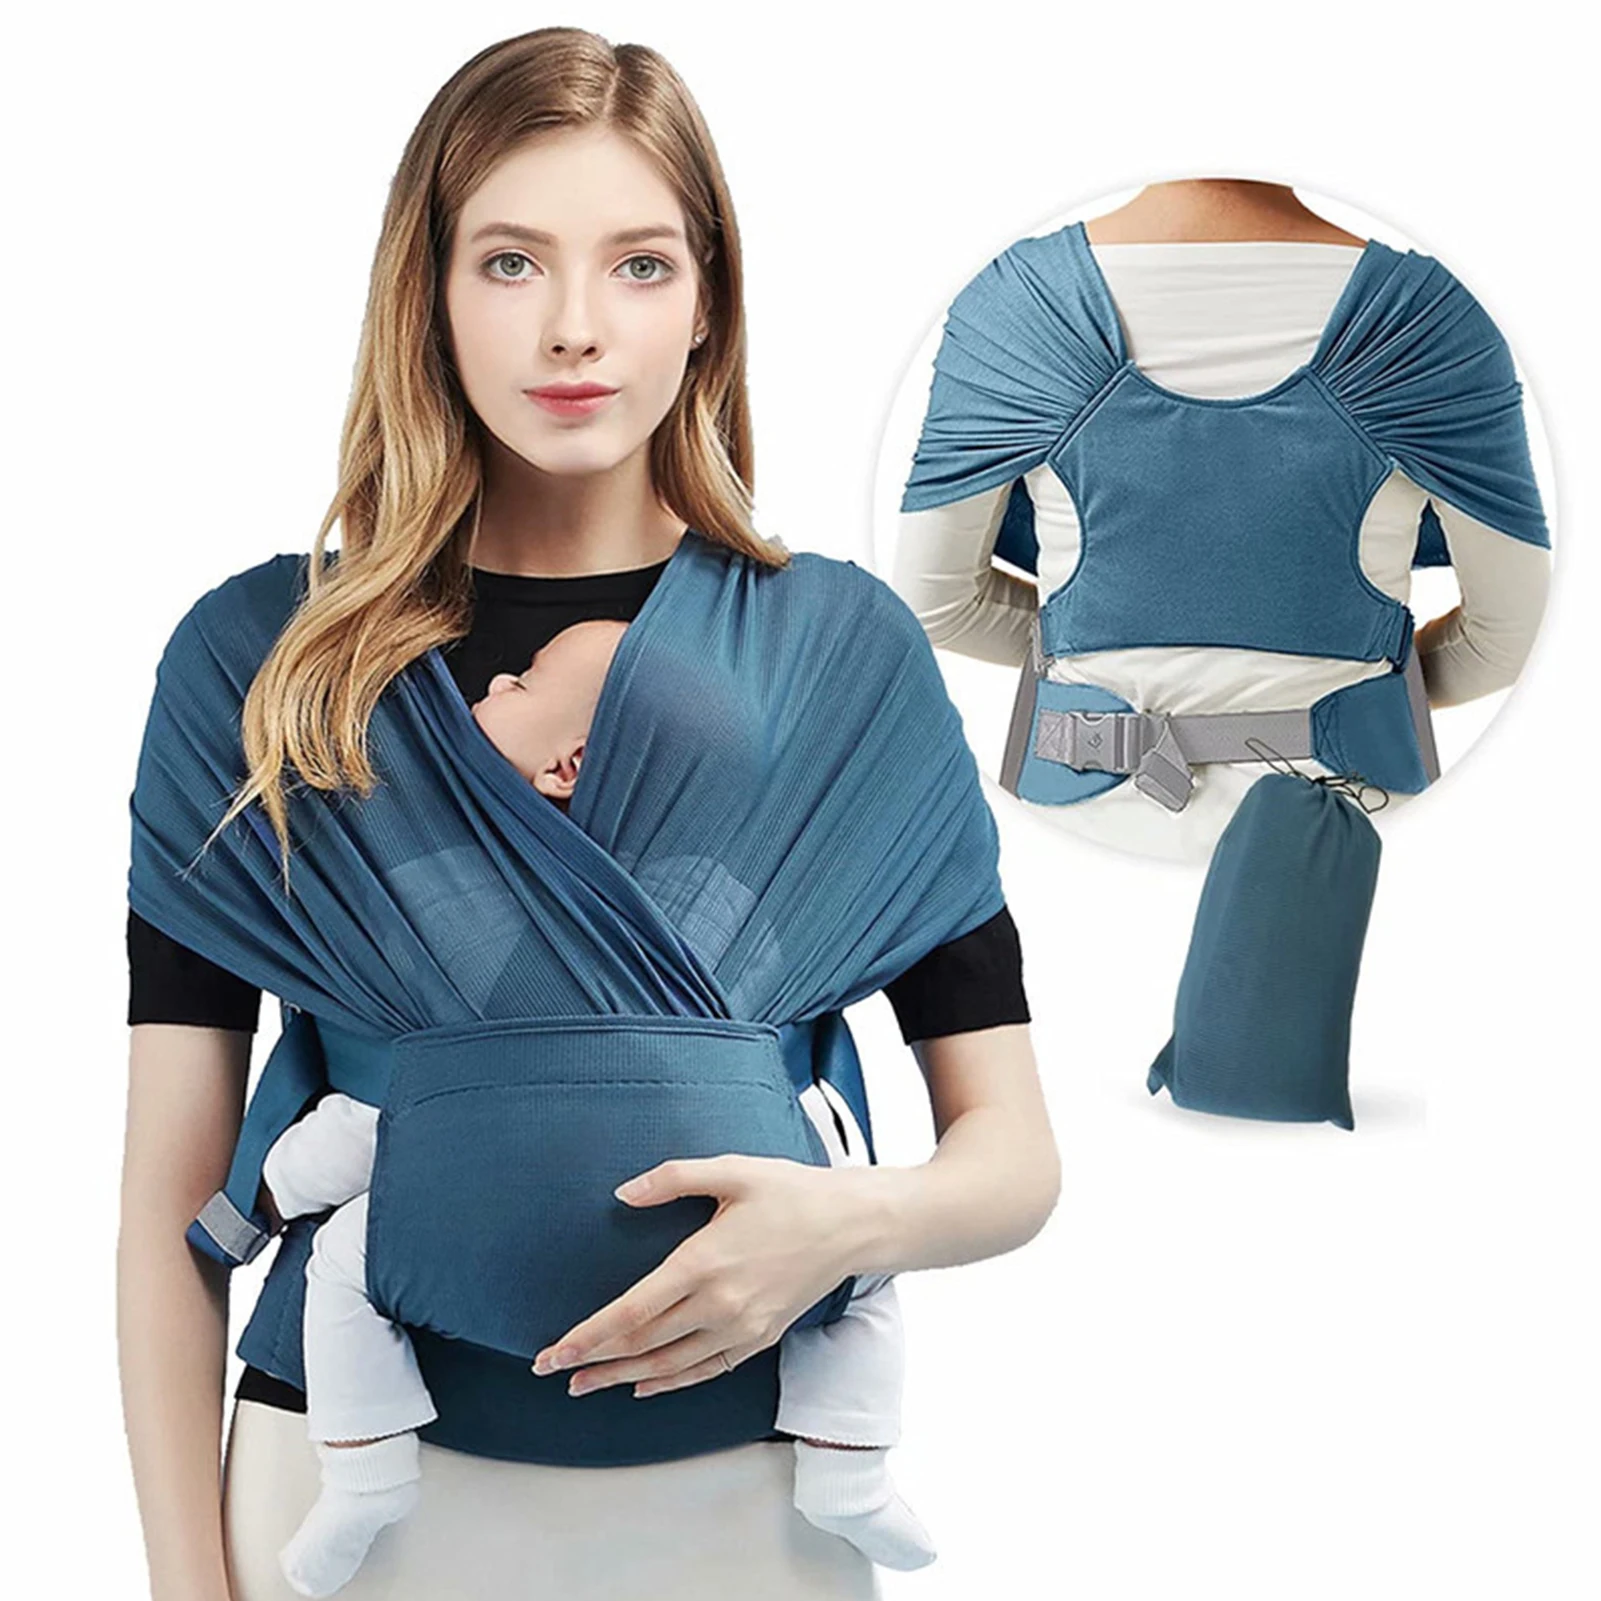 

Baby Carrier Sling Wrap Multifunctional Four Seasons Universal Front Holding Type Simple X-shaped Carrying Artifact Ergonomic